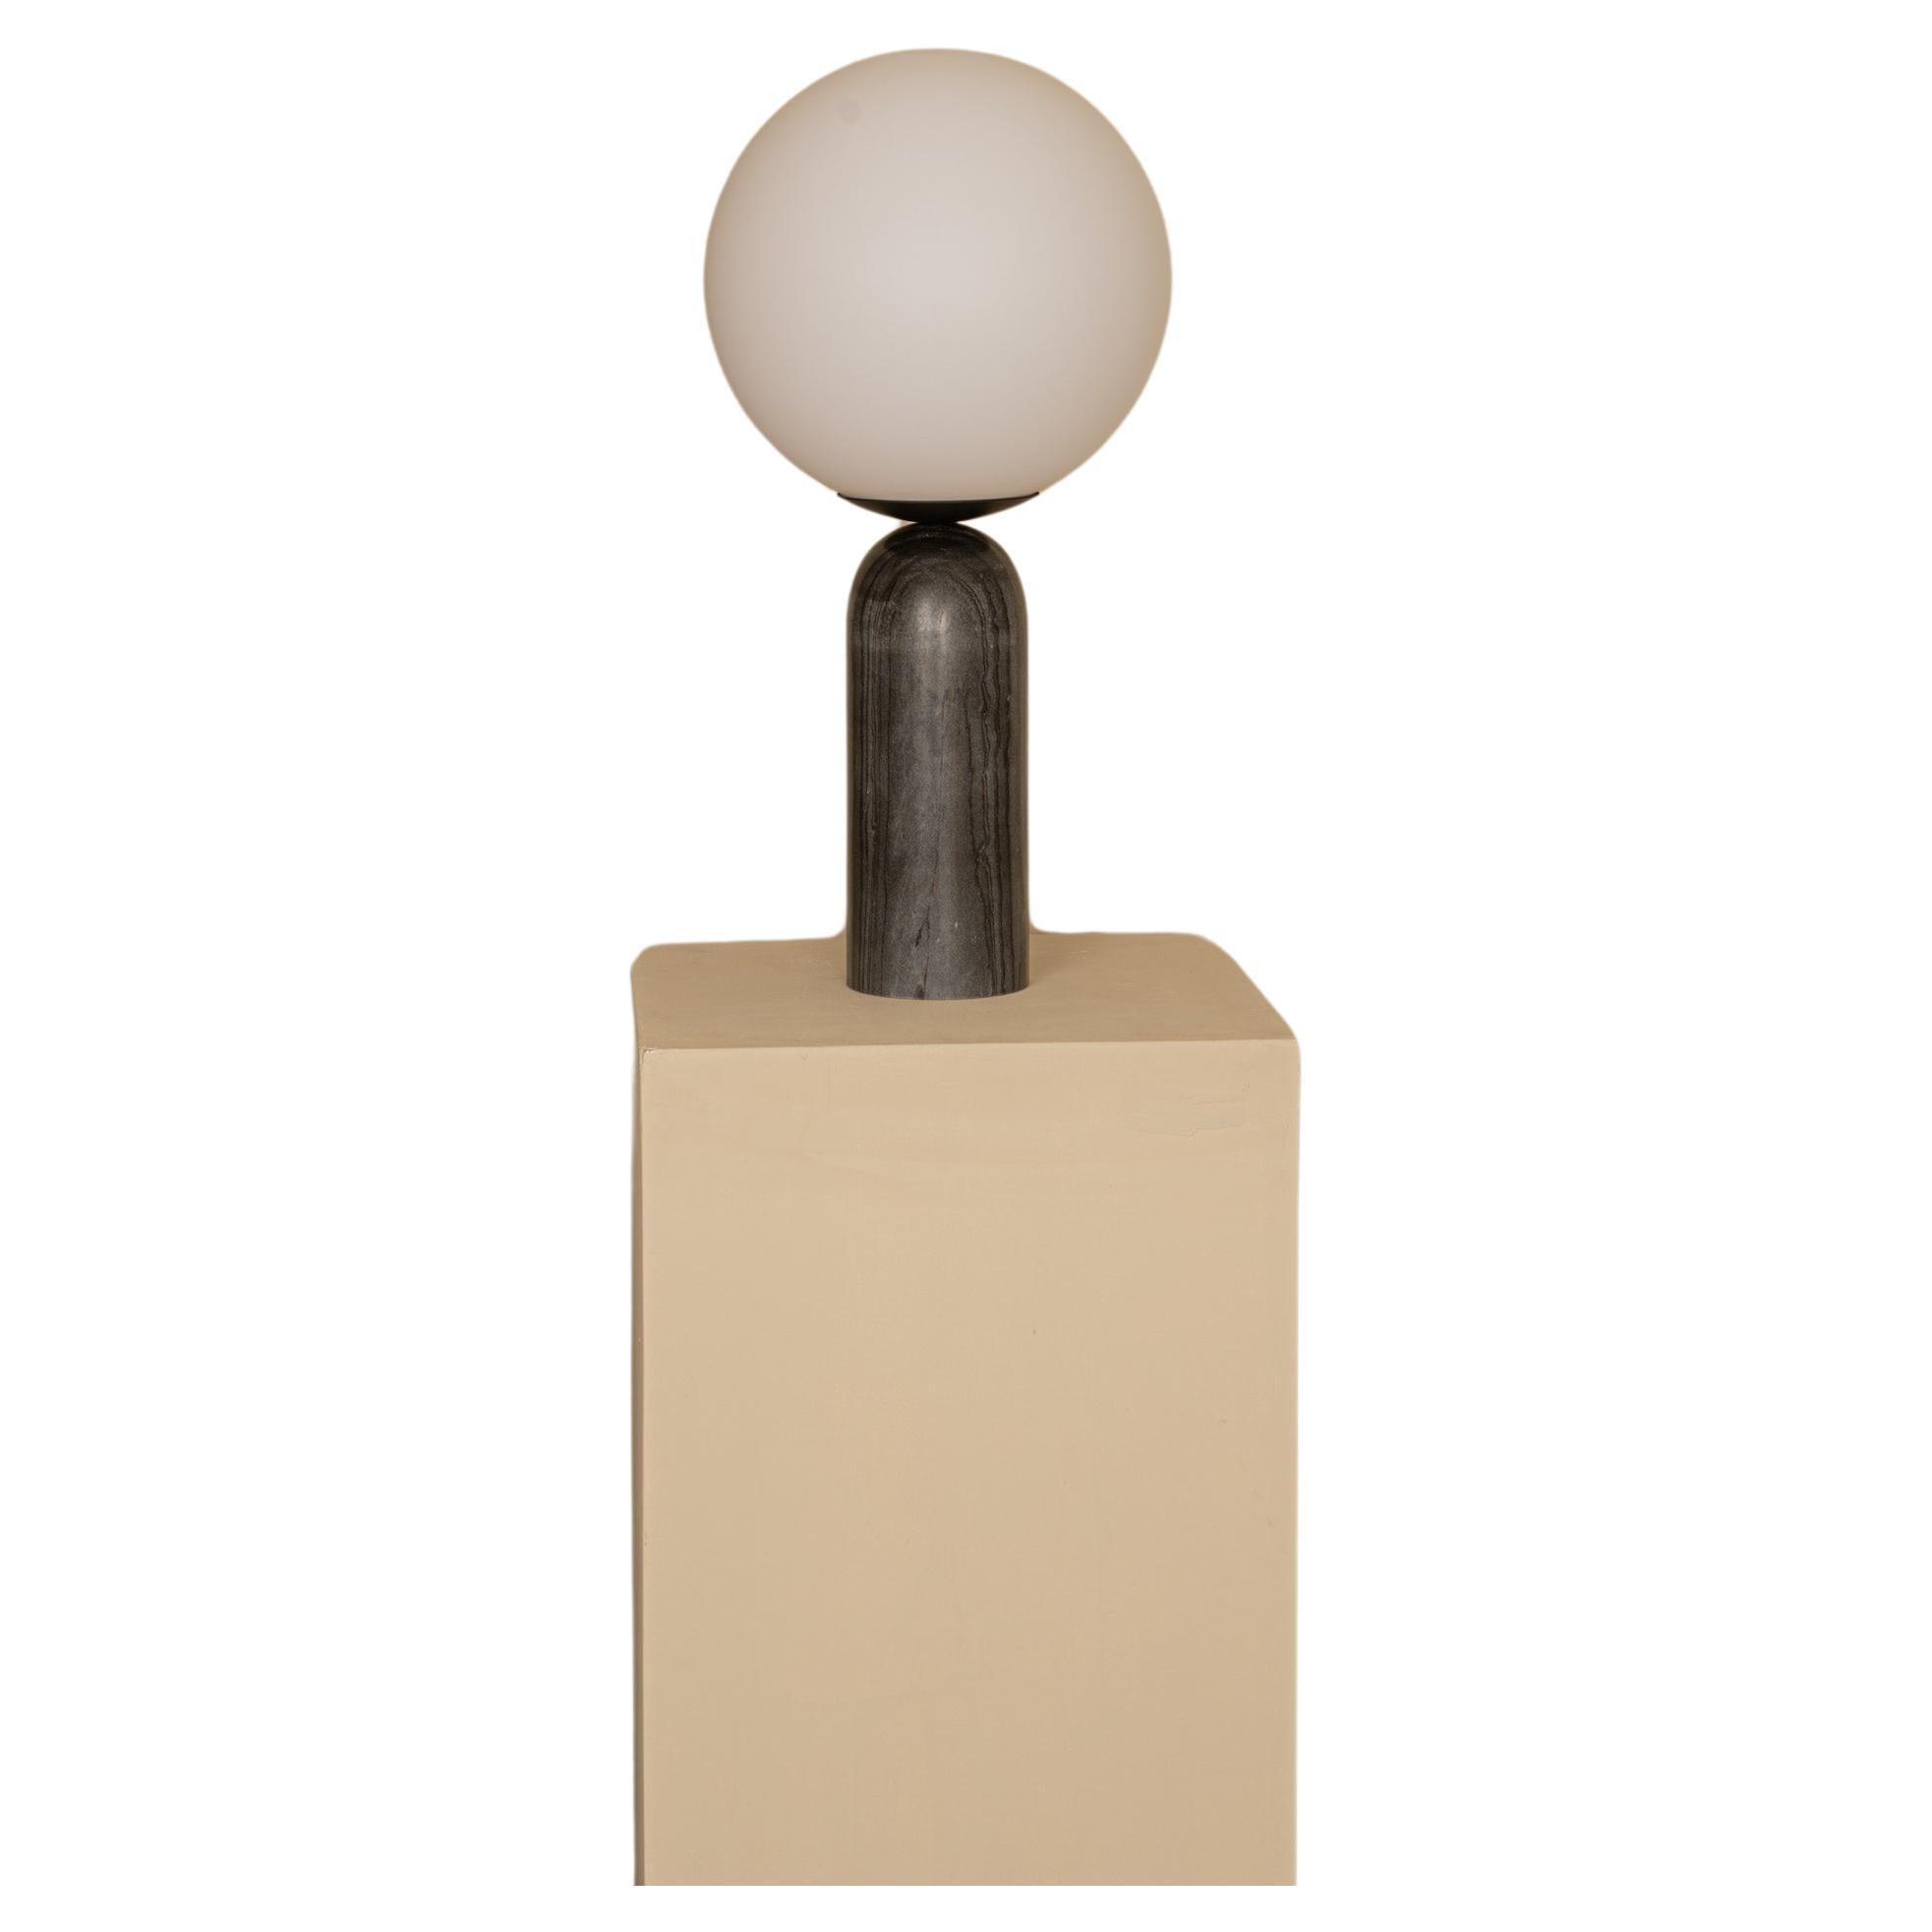 A modern representation of the greek mythology, the Atlas table lamp diffuses a beautiful light through its opal glass globe. The sphere sits on top of a minimal shaped base higlighted with a metal detail.